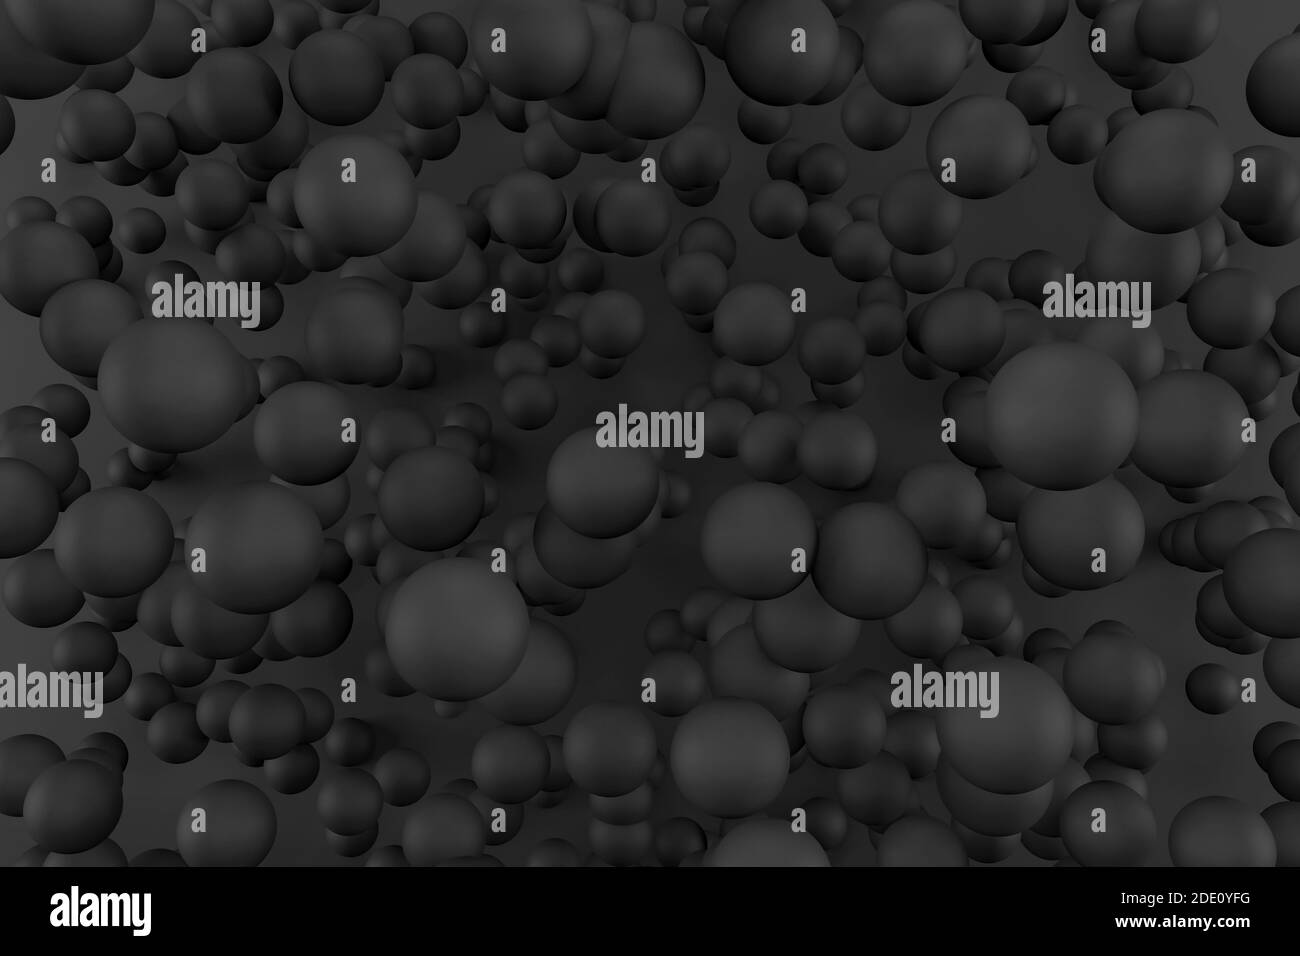 3d render black balls on a black background. Abstract geometric shapes. Minimalist concept Stock Photo